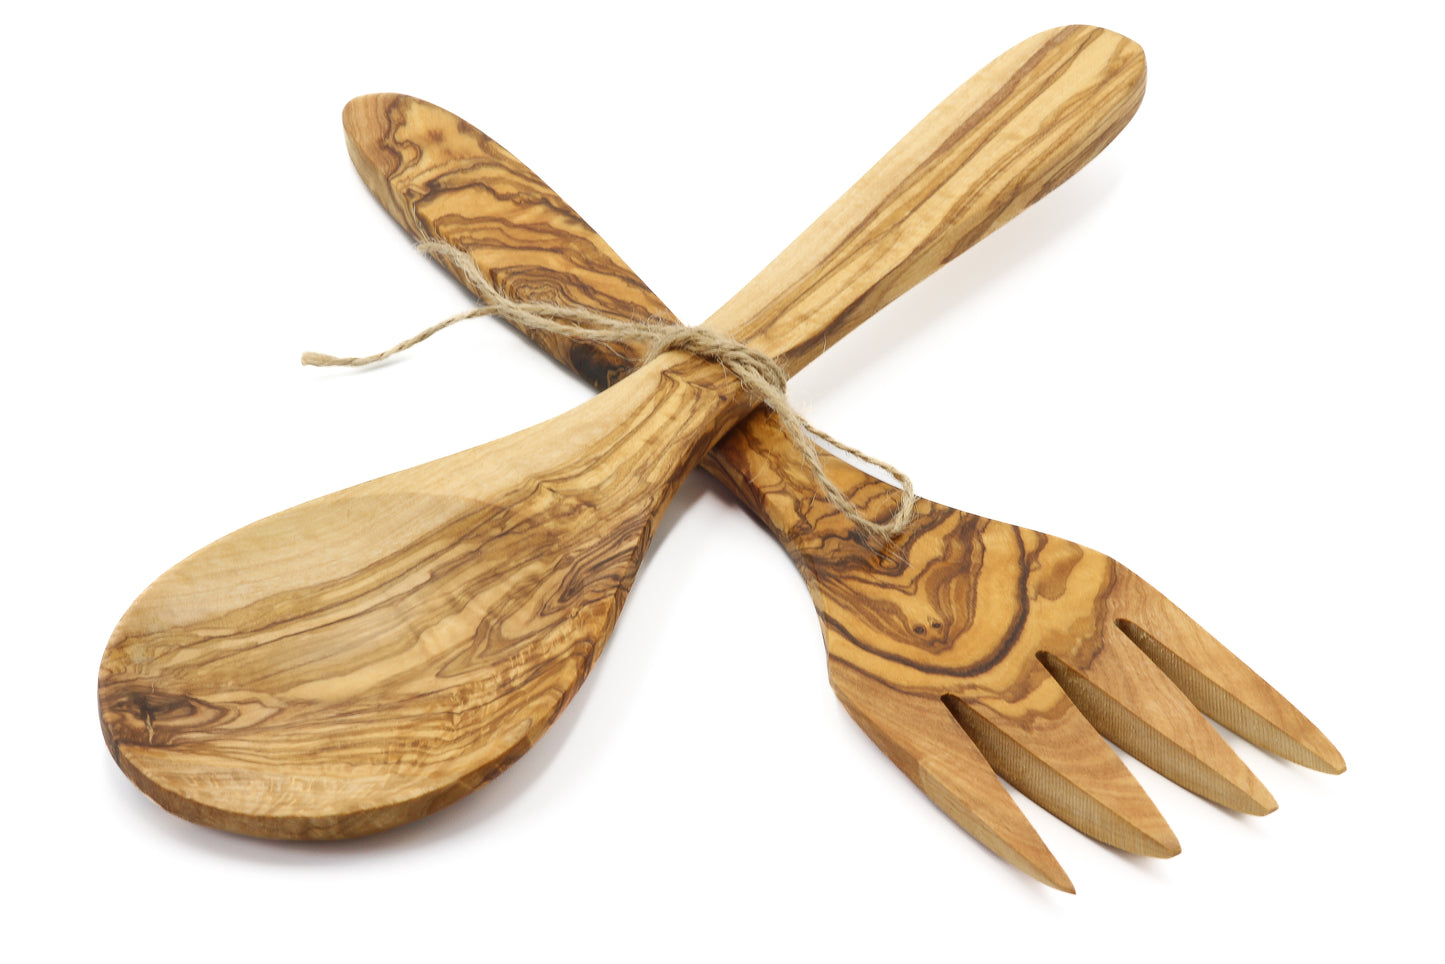 Duo salad servers made from olive wood, perfect for gatherings